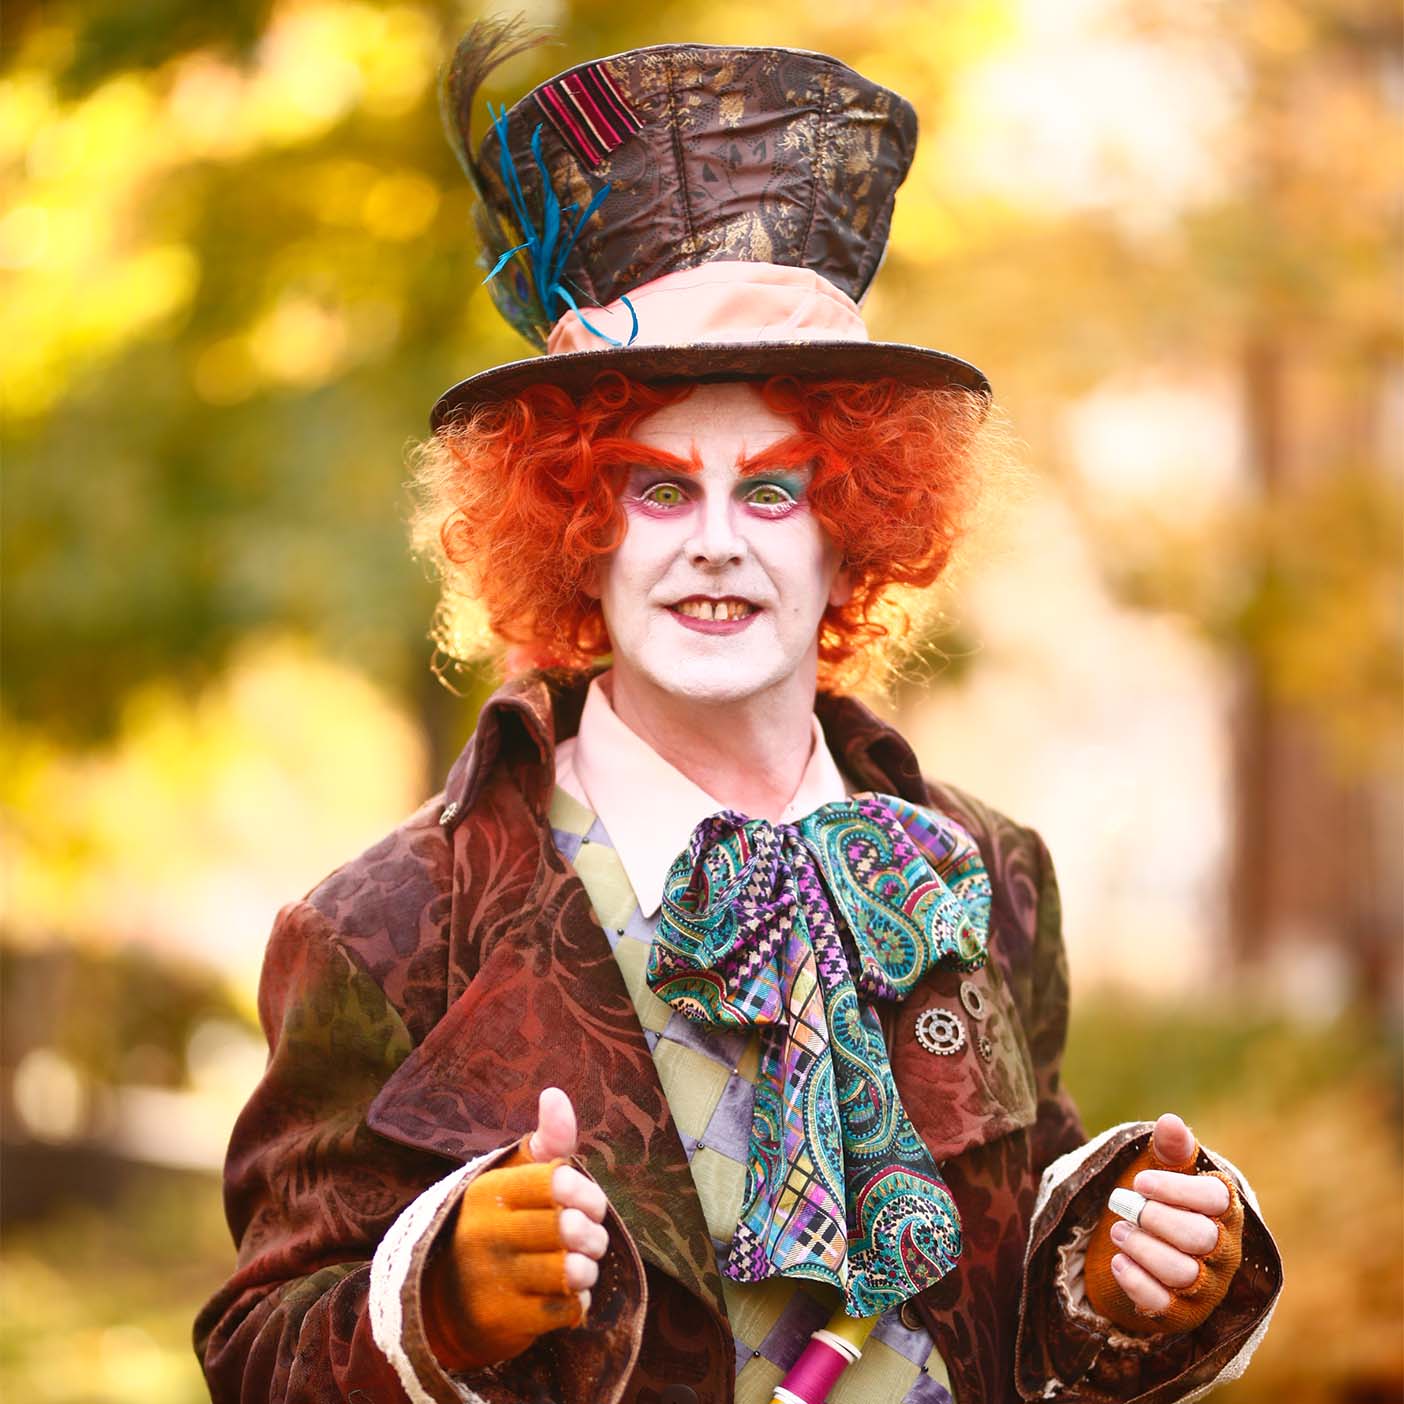 Tom Holmoe dressed up as the Mad Hatter for Halloween.